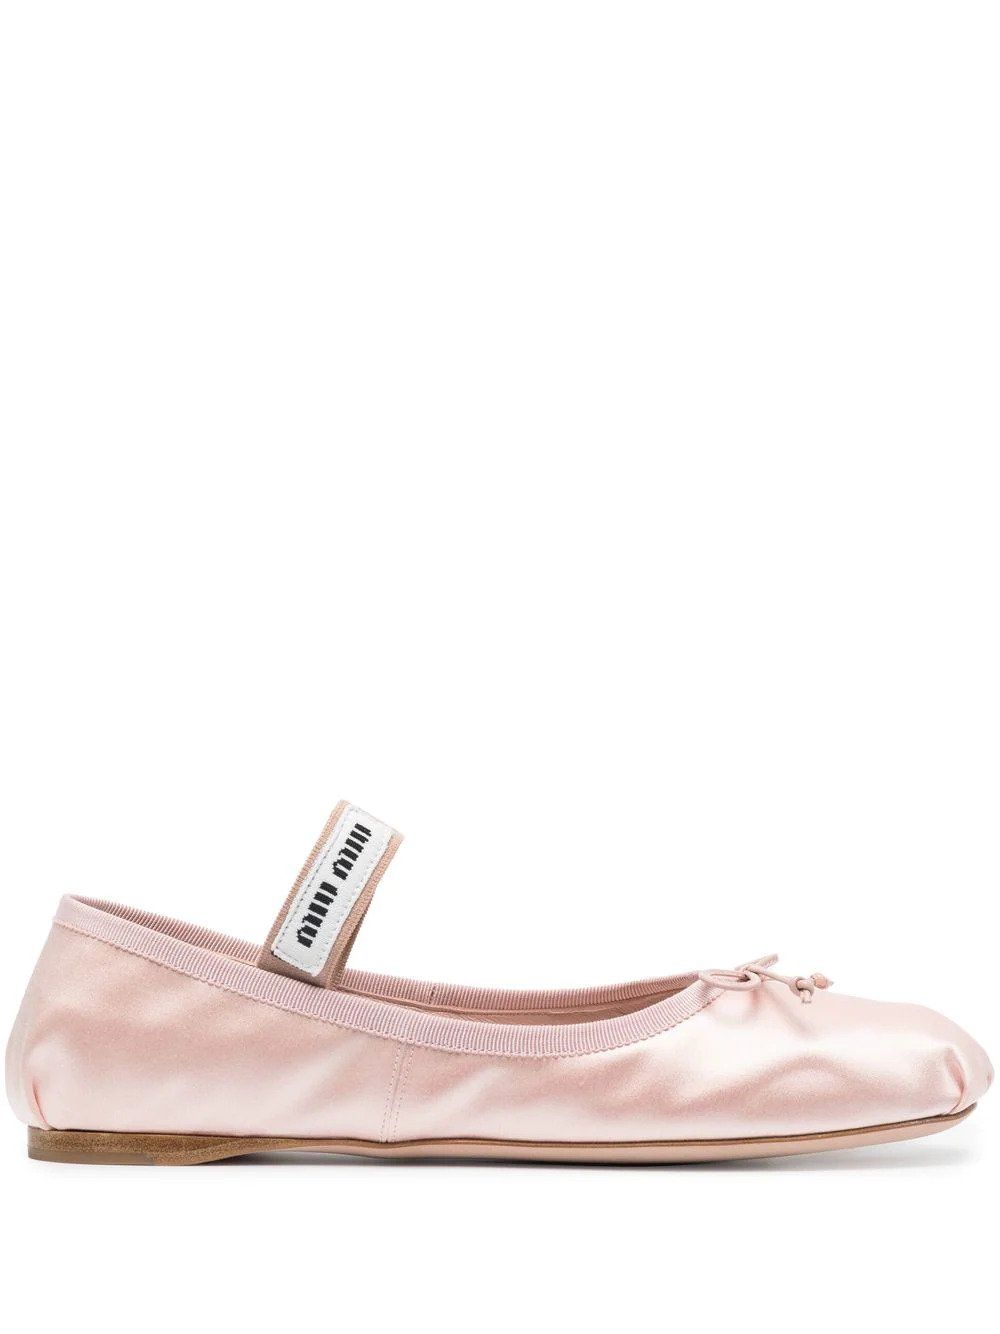 The Miu Miu Ballet Flats on Every It Girl's Wish List | Who What Wear